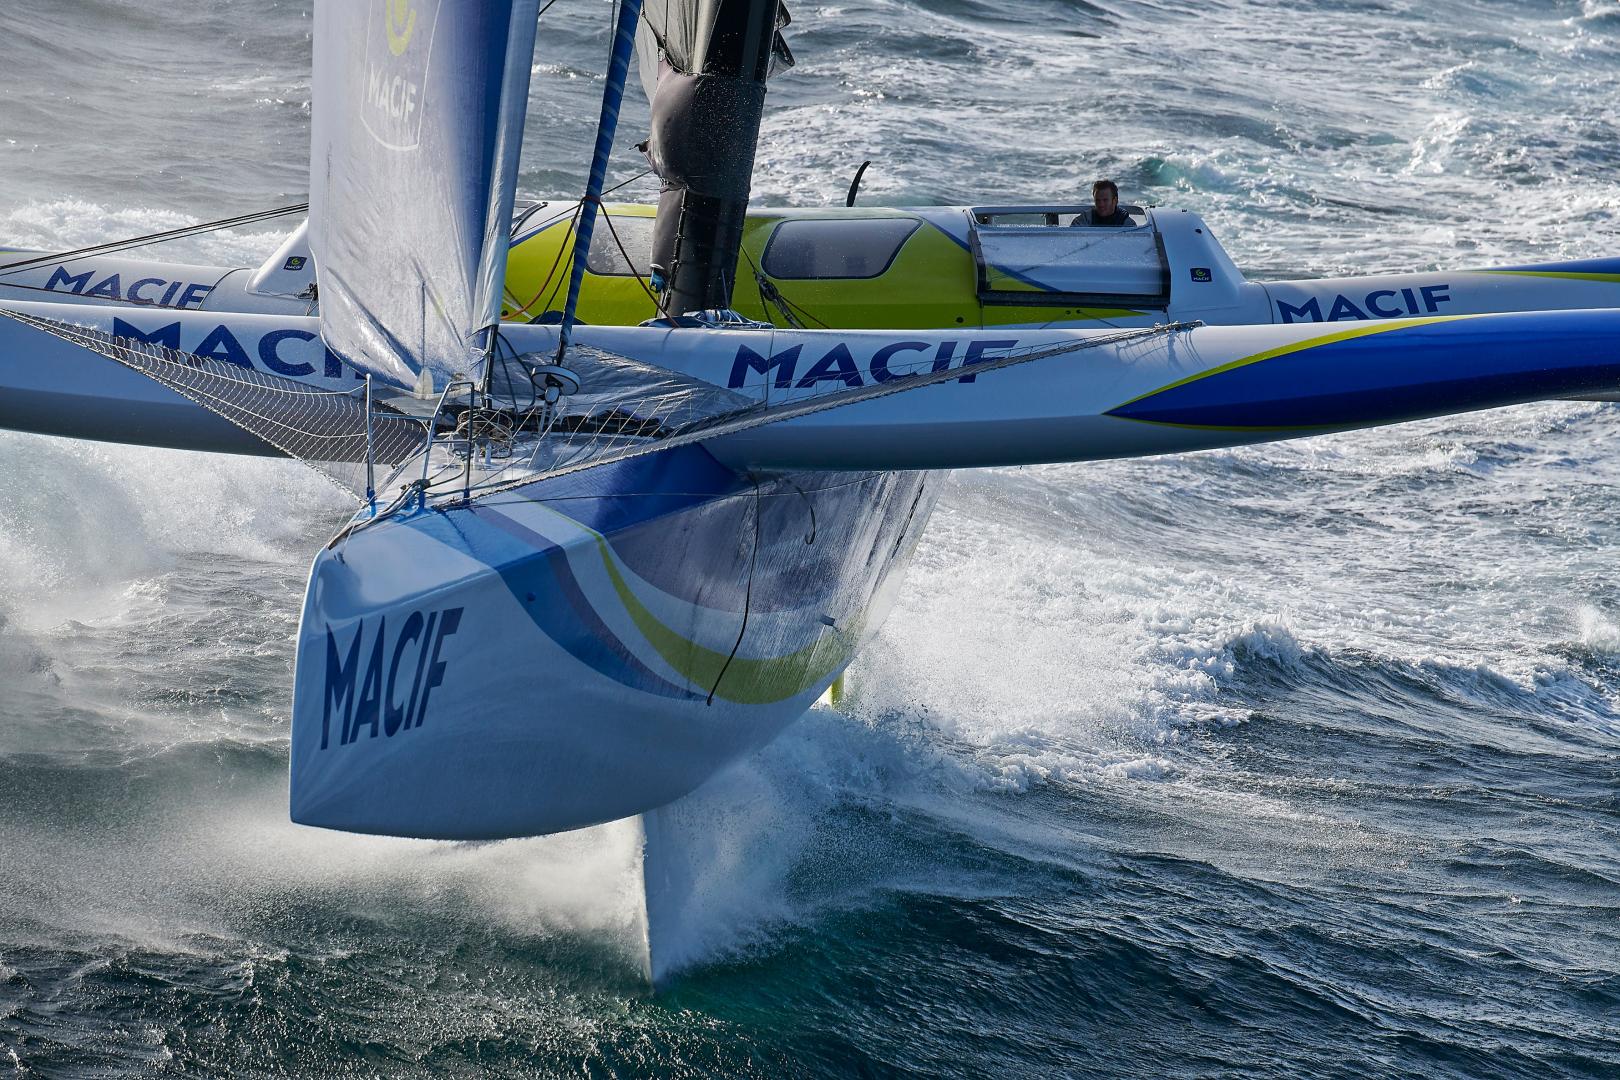 Brest Atlantiques race - The trimarans make their own way